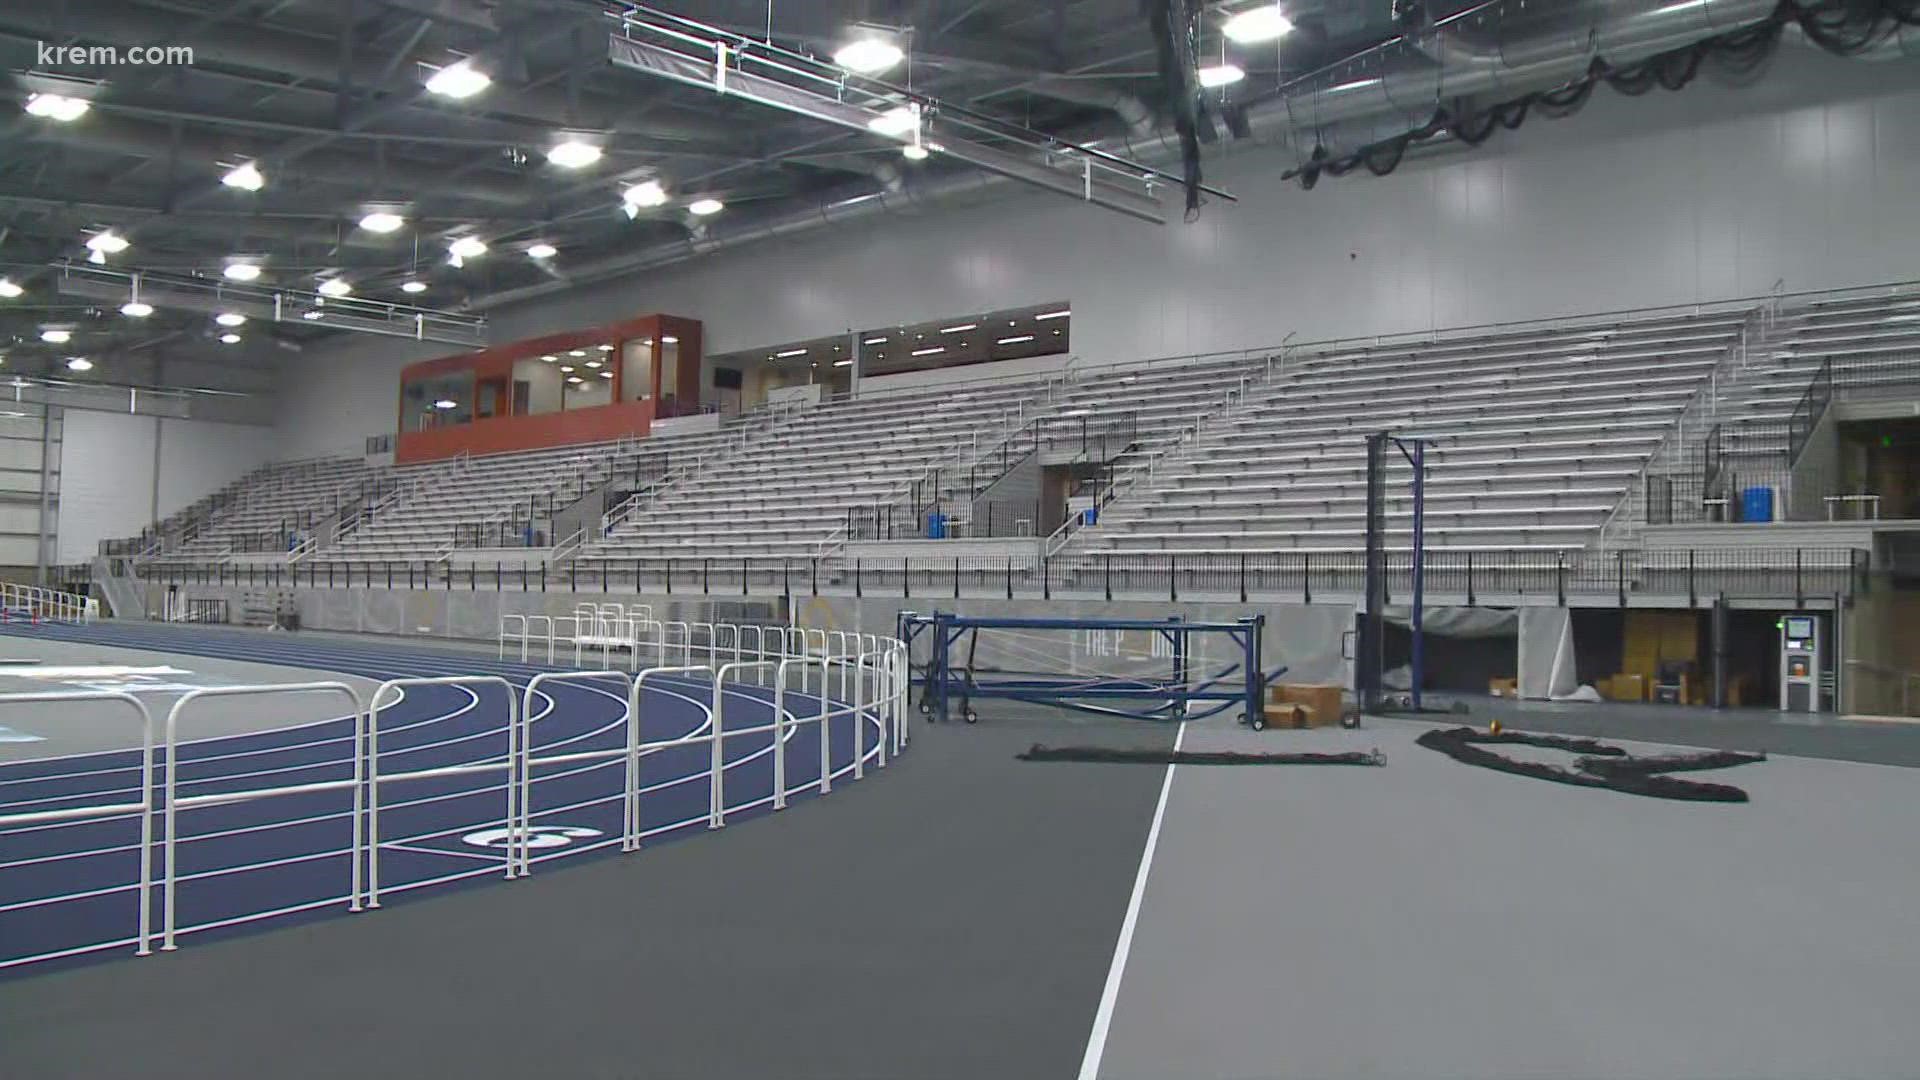 KREM 2's Nicole Hernandez talks with Ryan Ford on the key features of the Podium's immense indoor track.